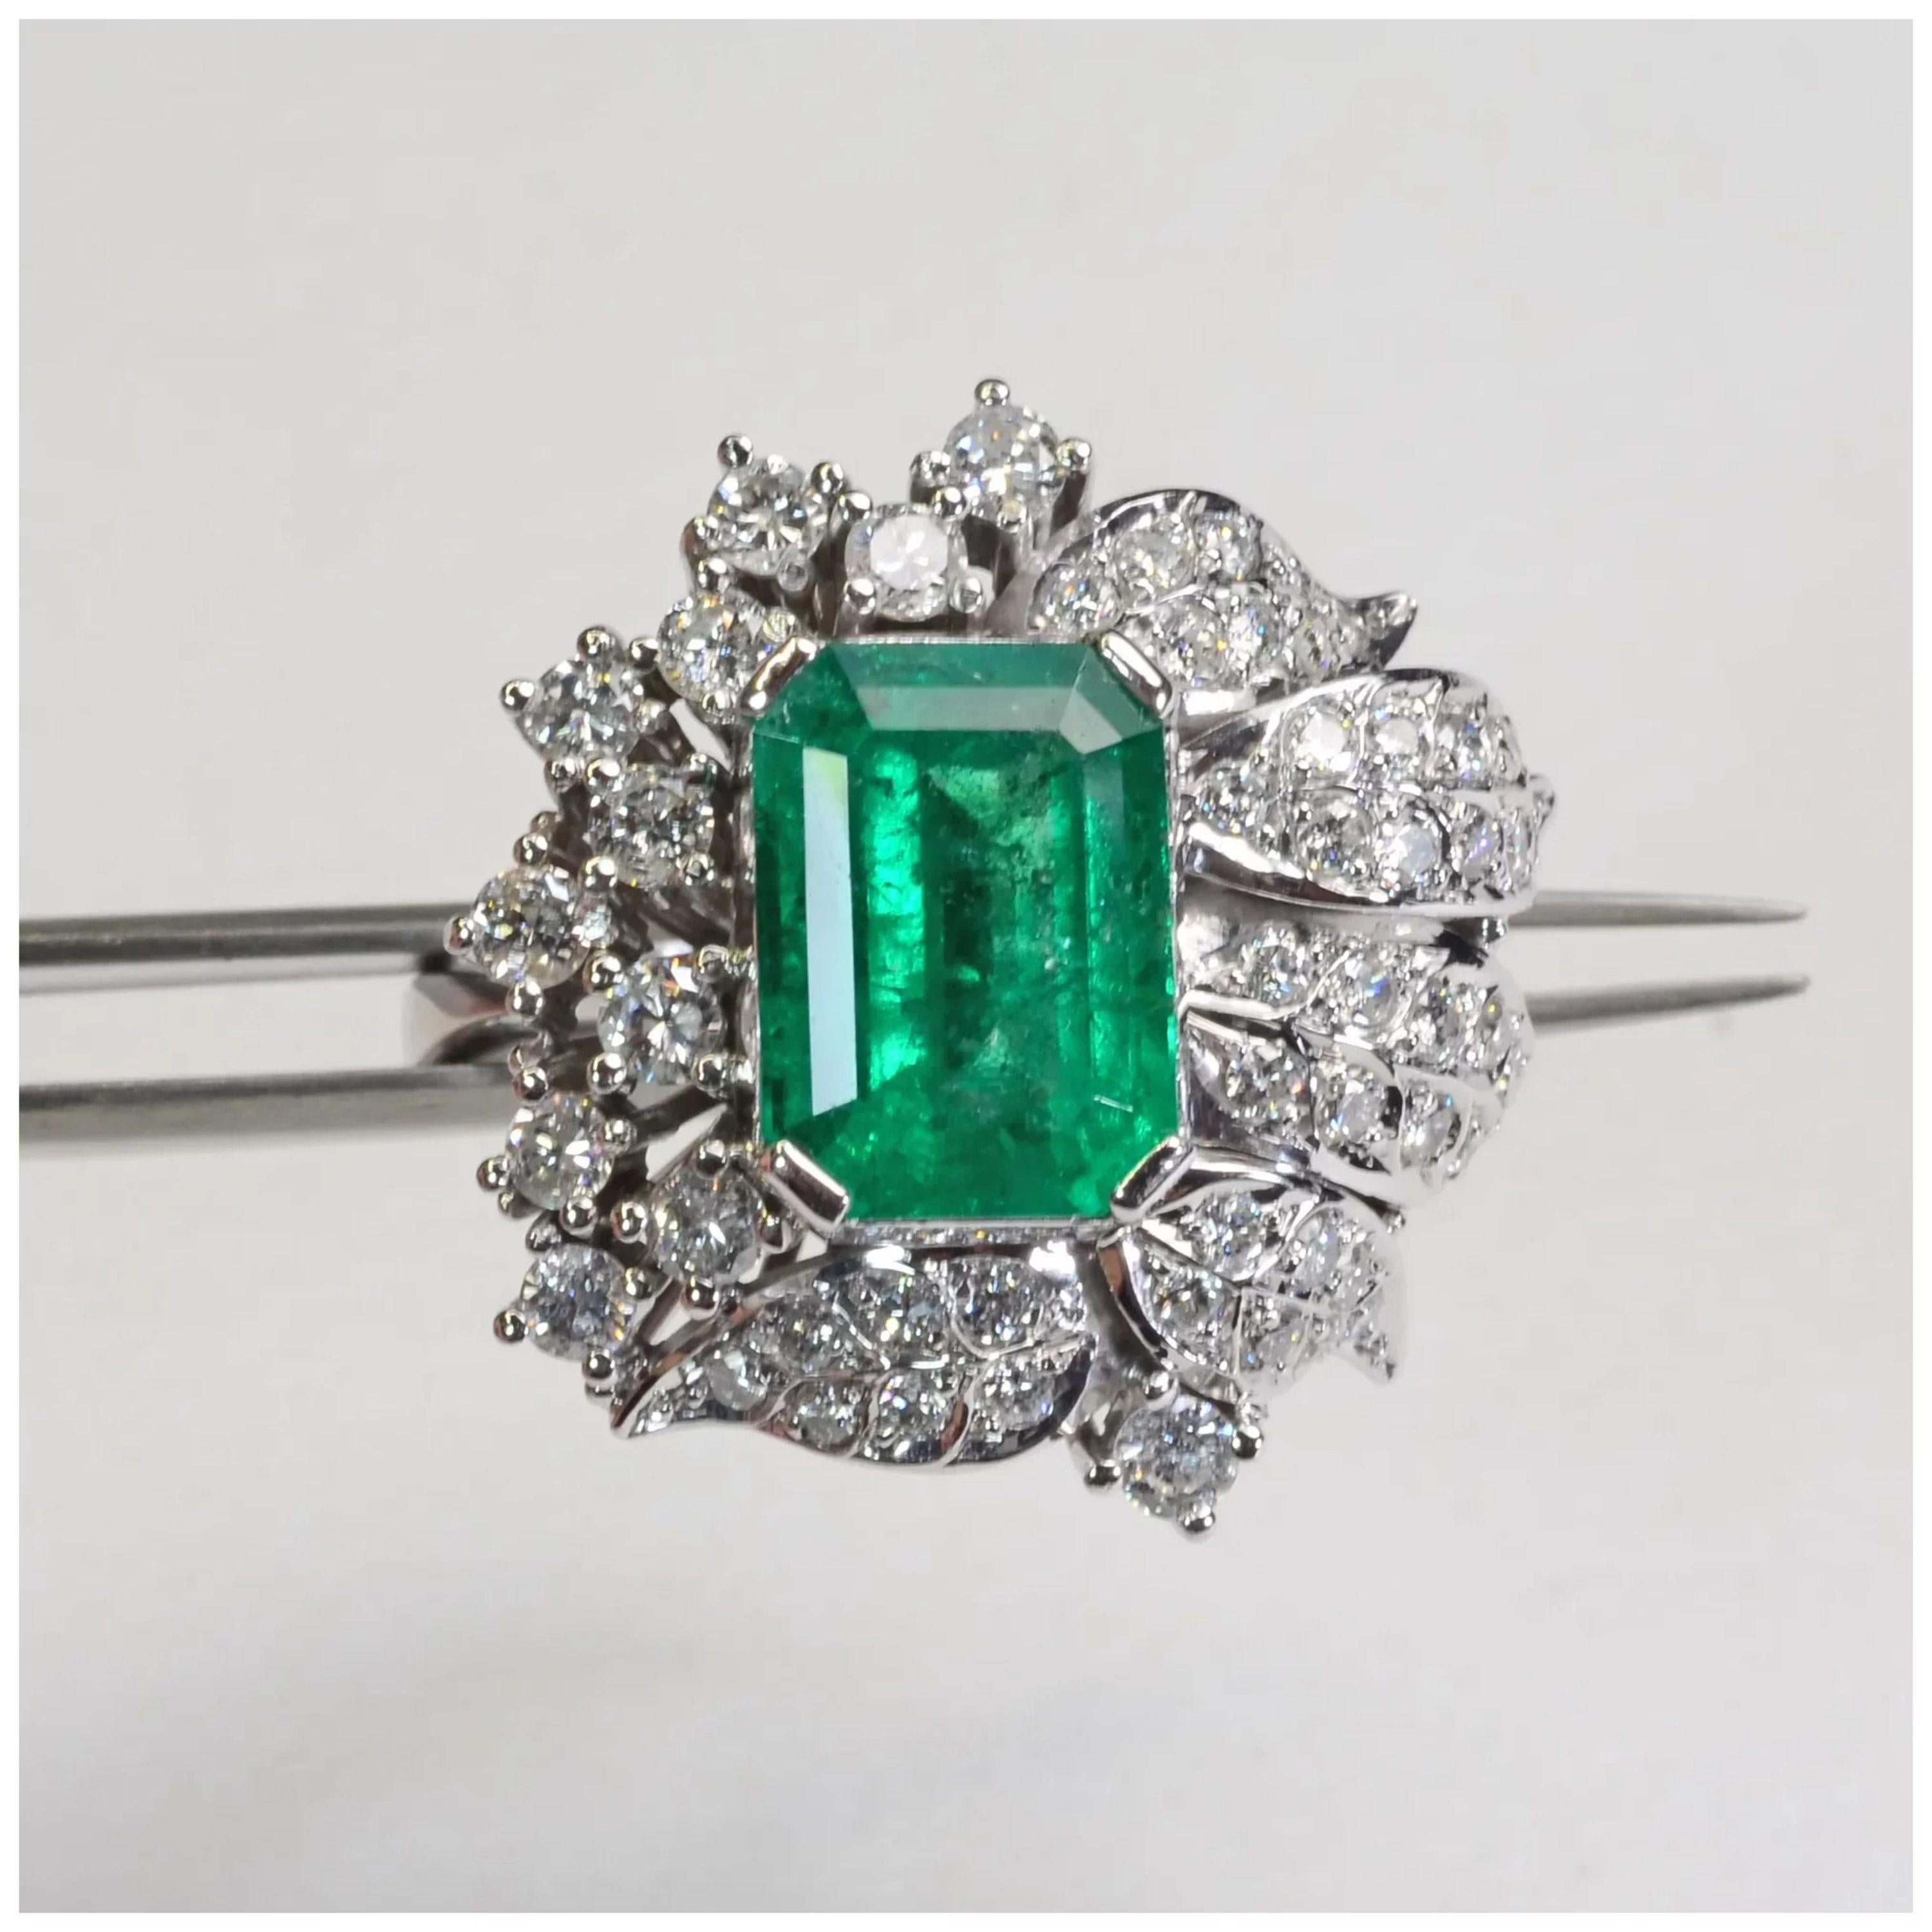 For Sale:  3 Carat Colombian Emerald Diamond Engagement Wedding Ring White Gold Cocktail  4